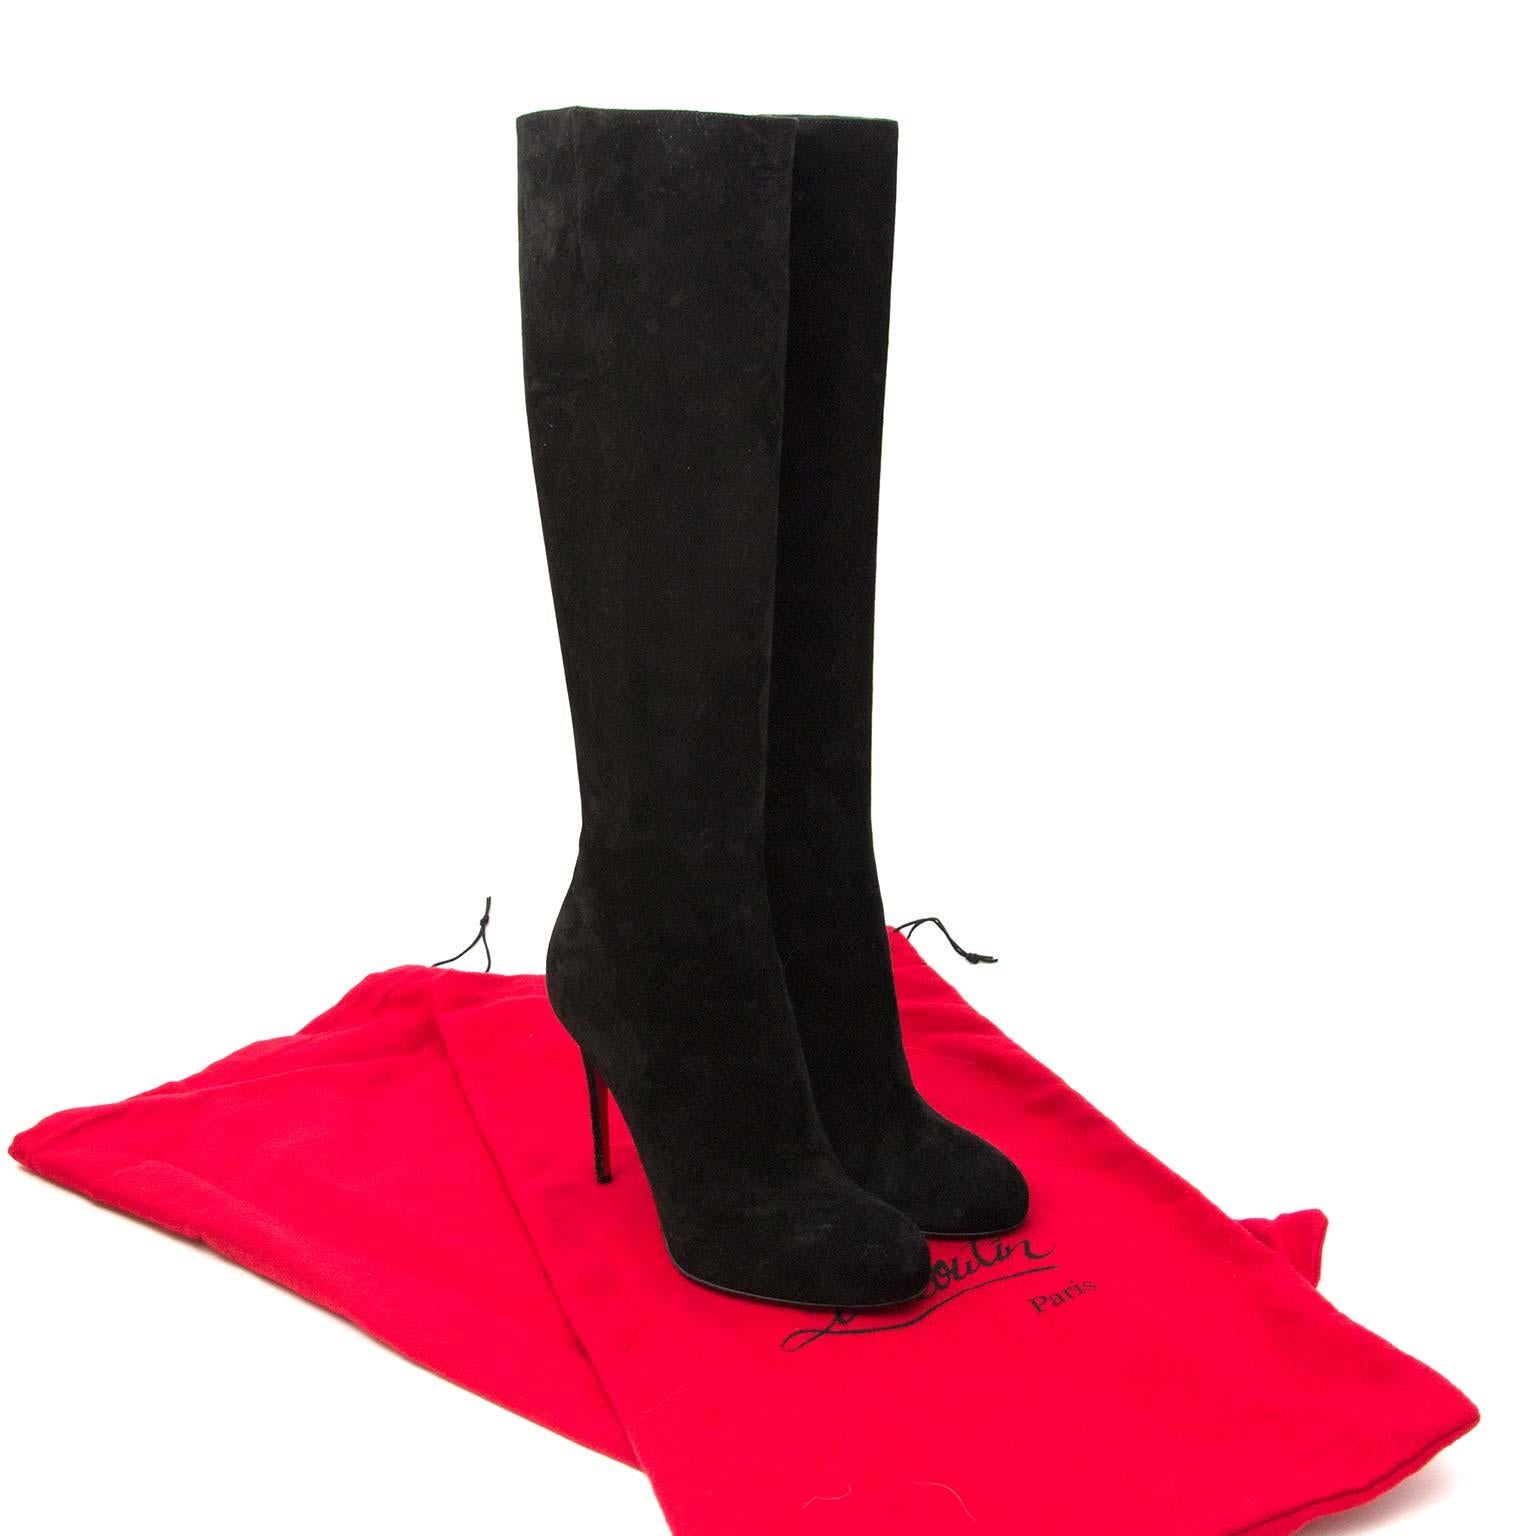 NEW, never worn

Estimated Retail Price: €1260      SAVE 68%

Christian Louboutin 'Fifi' Black Suede Boots - size 37.5

Some things never go out of style! Take these gorgeous Christian Louboutin Fifi velours leather boots for example. Their stunning